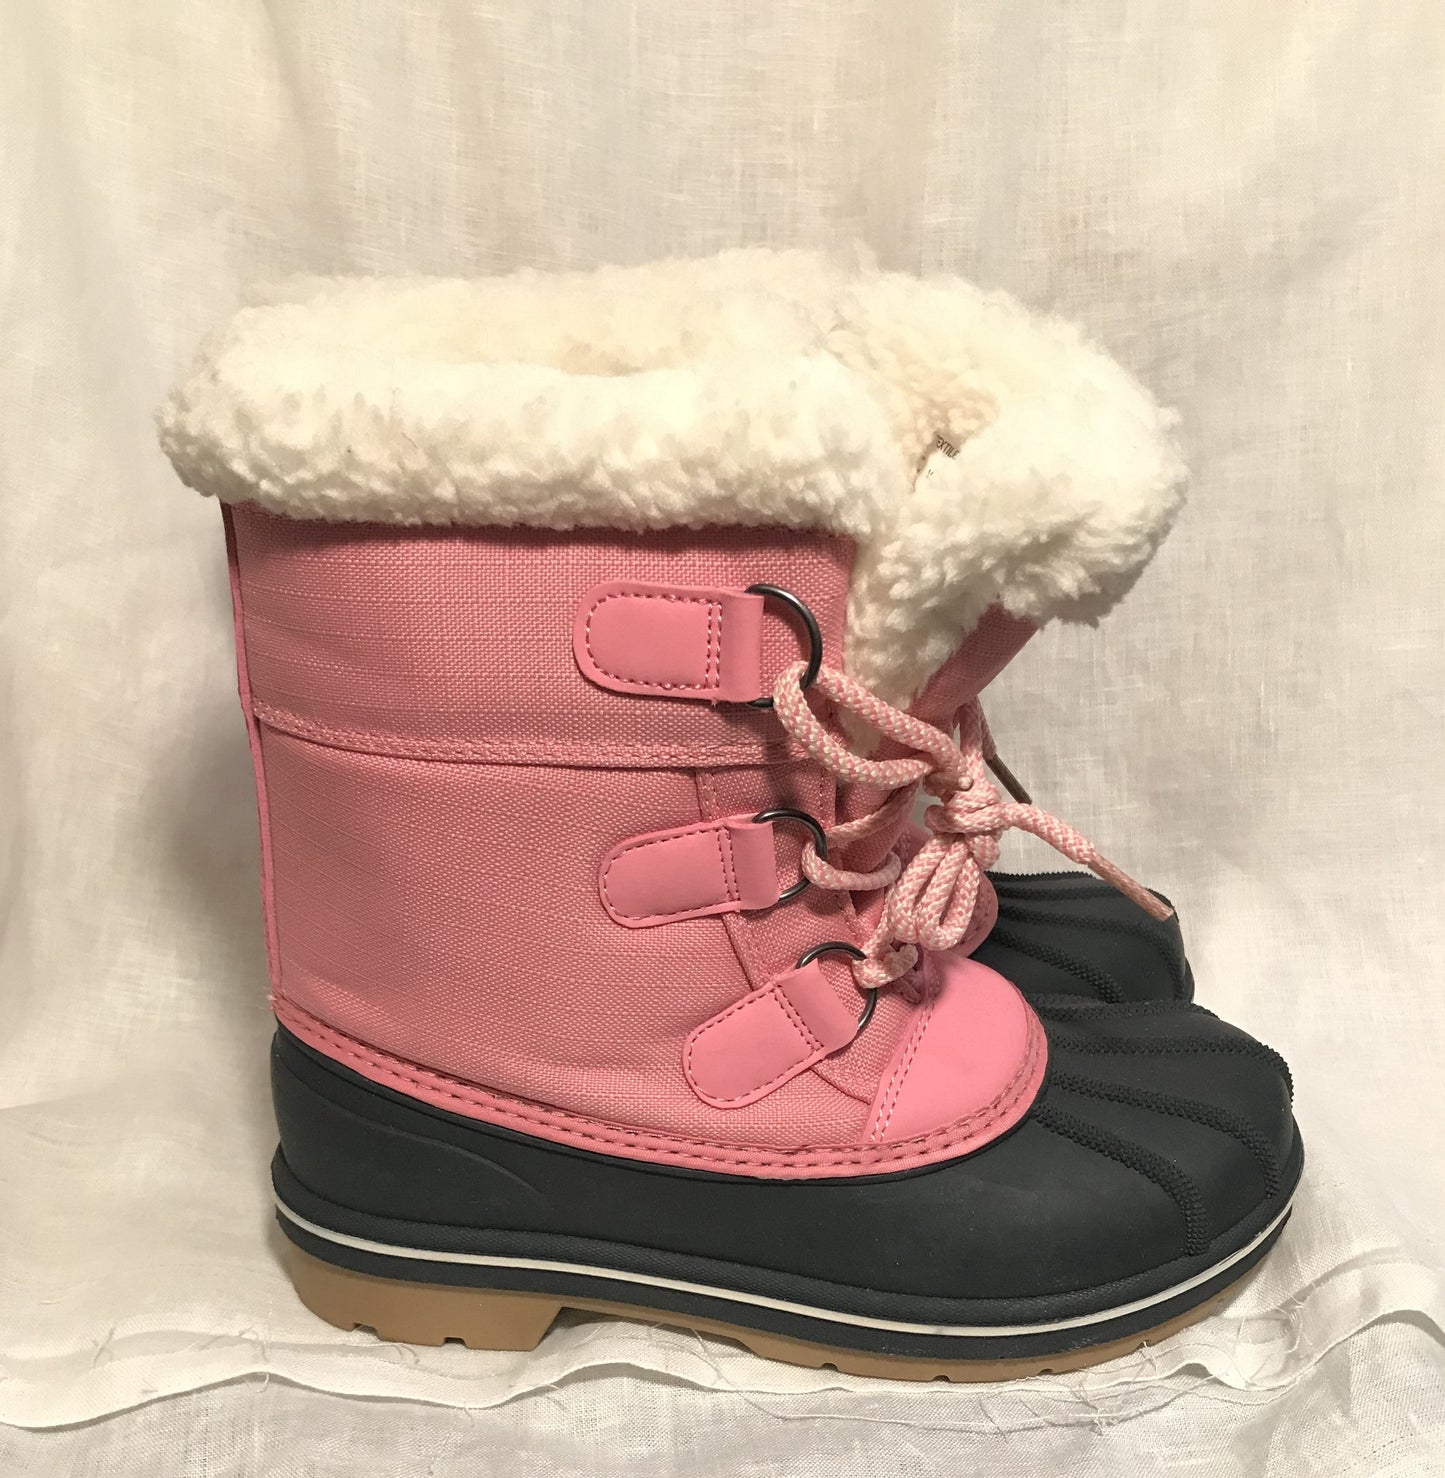 Pink & Black Boots- Sizes 2